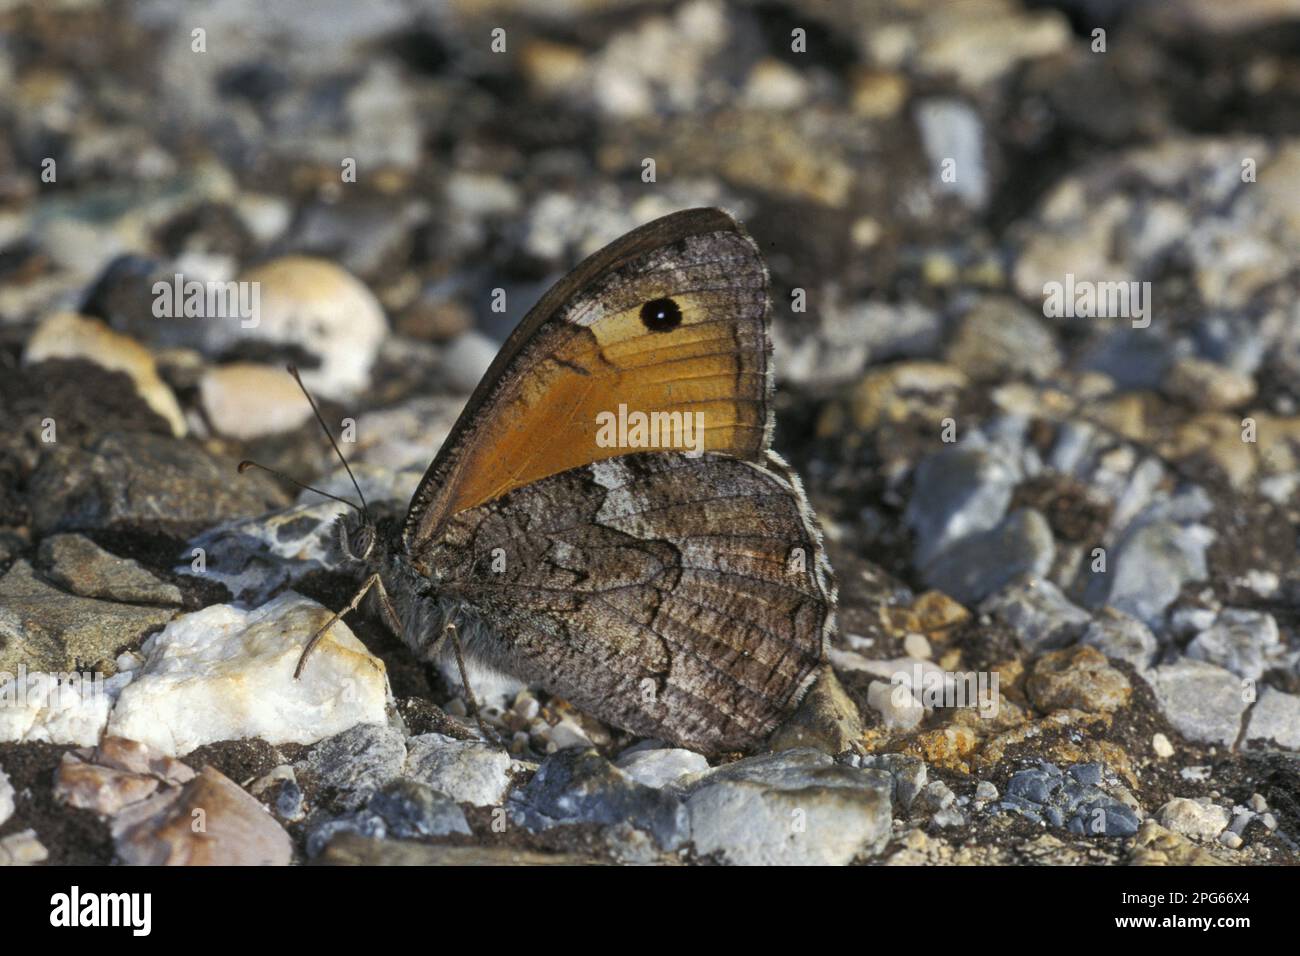 Brush-footed butterfly (Nymphalidae), Other animals, Insects, Butterflies, Animals, Southern Grayling (Hipparchia aristaeus) adult male, resting Stock Photo